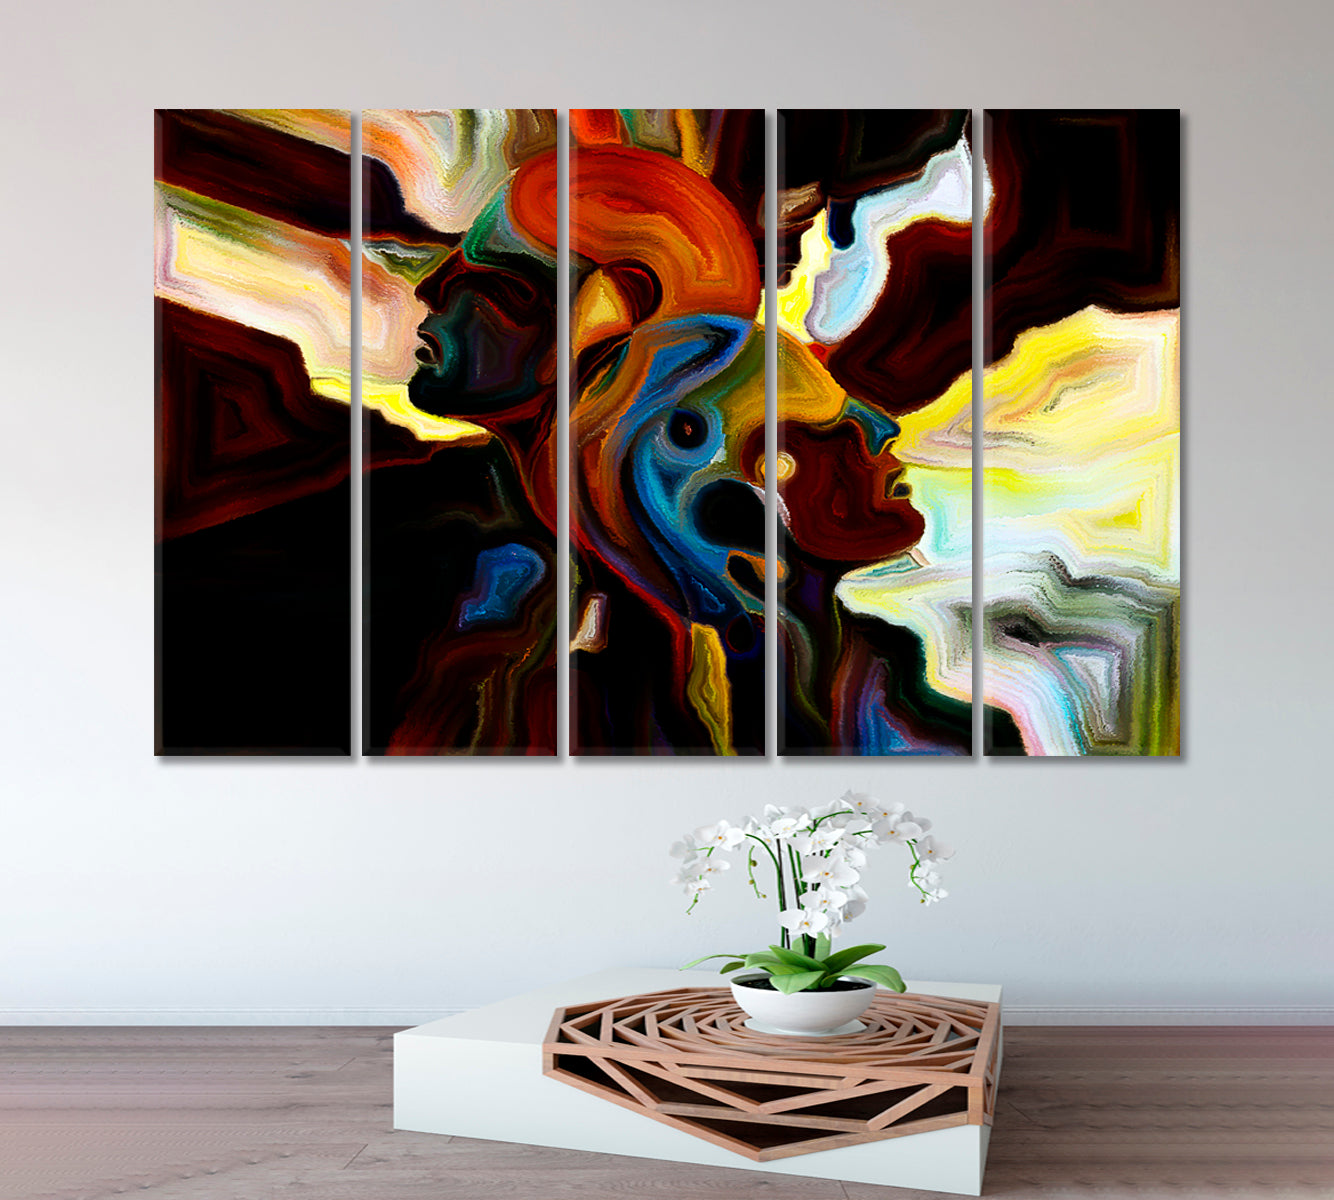 Psychedelic Love of Nature Abstract Patterns Abstract Art Print Artesty 5 panels 36" x 24" 